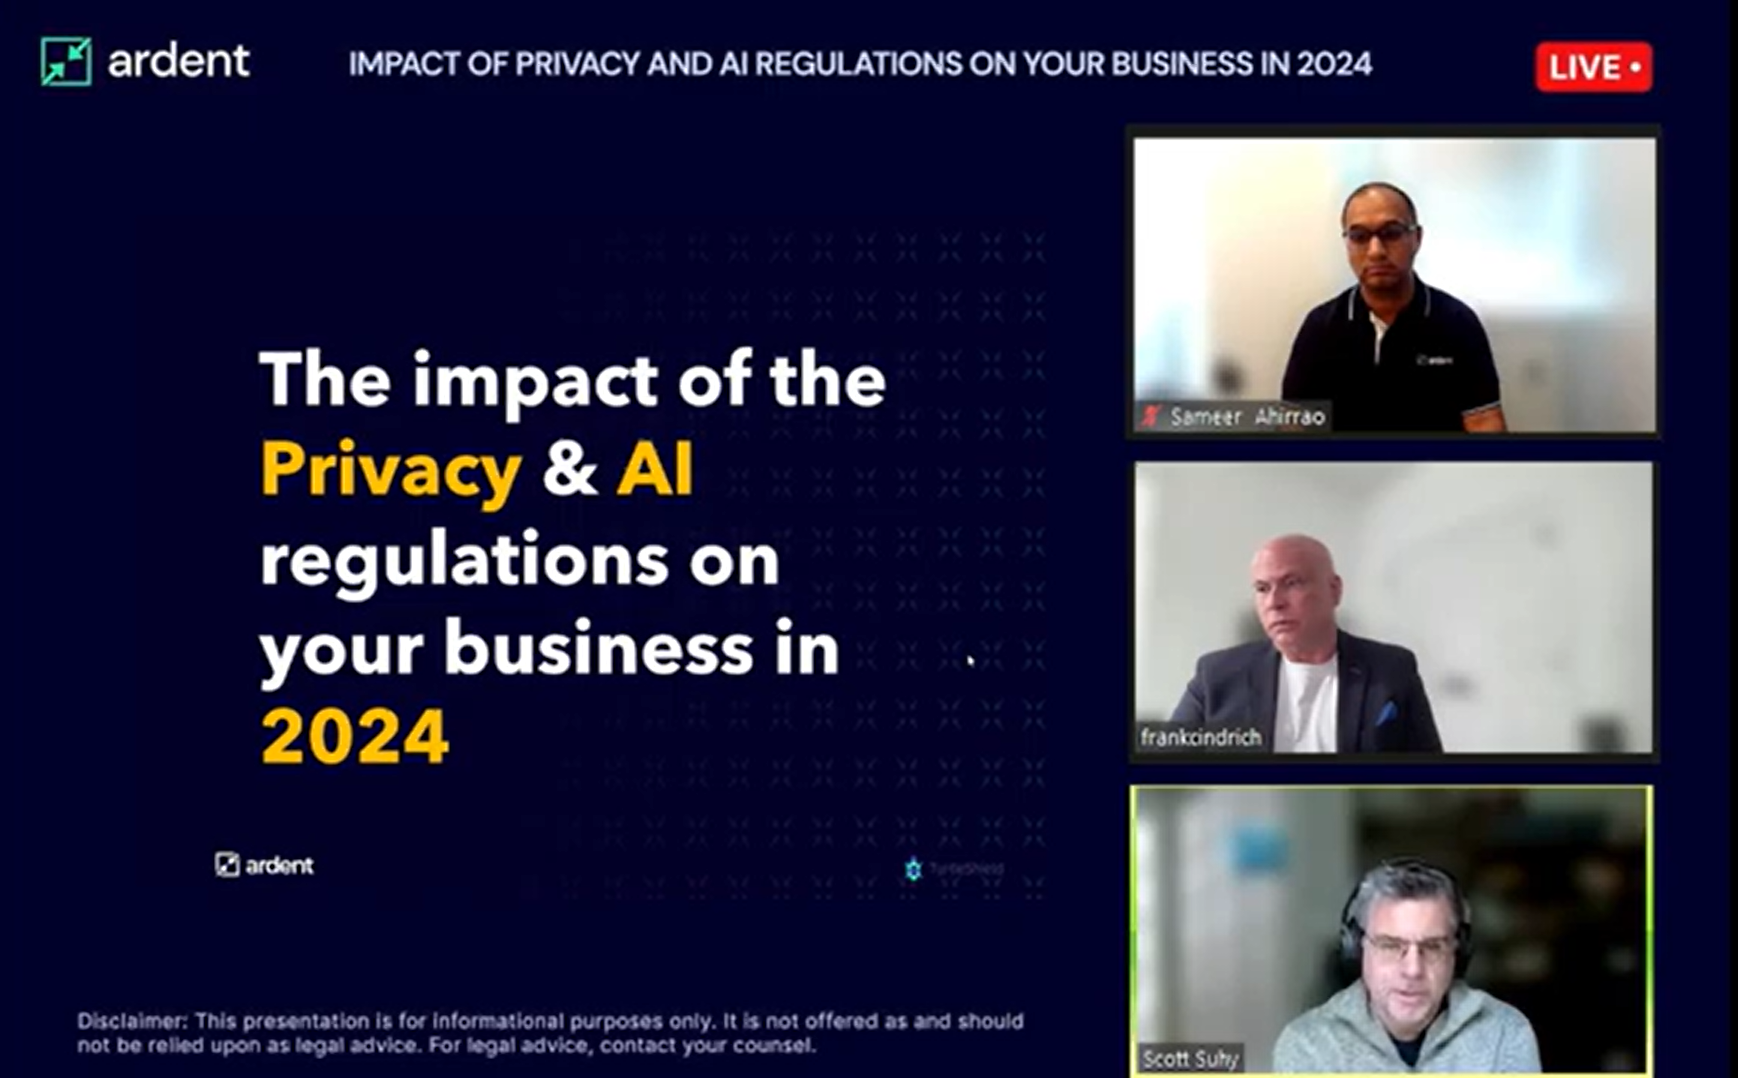 Impact of Privacy and AI Regulations on Your Business in 2024